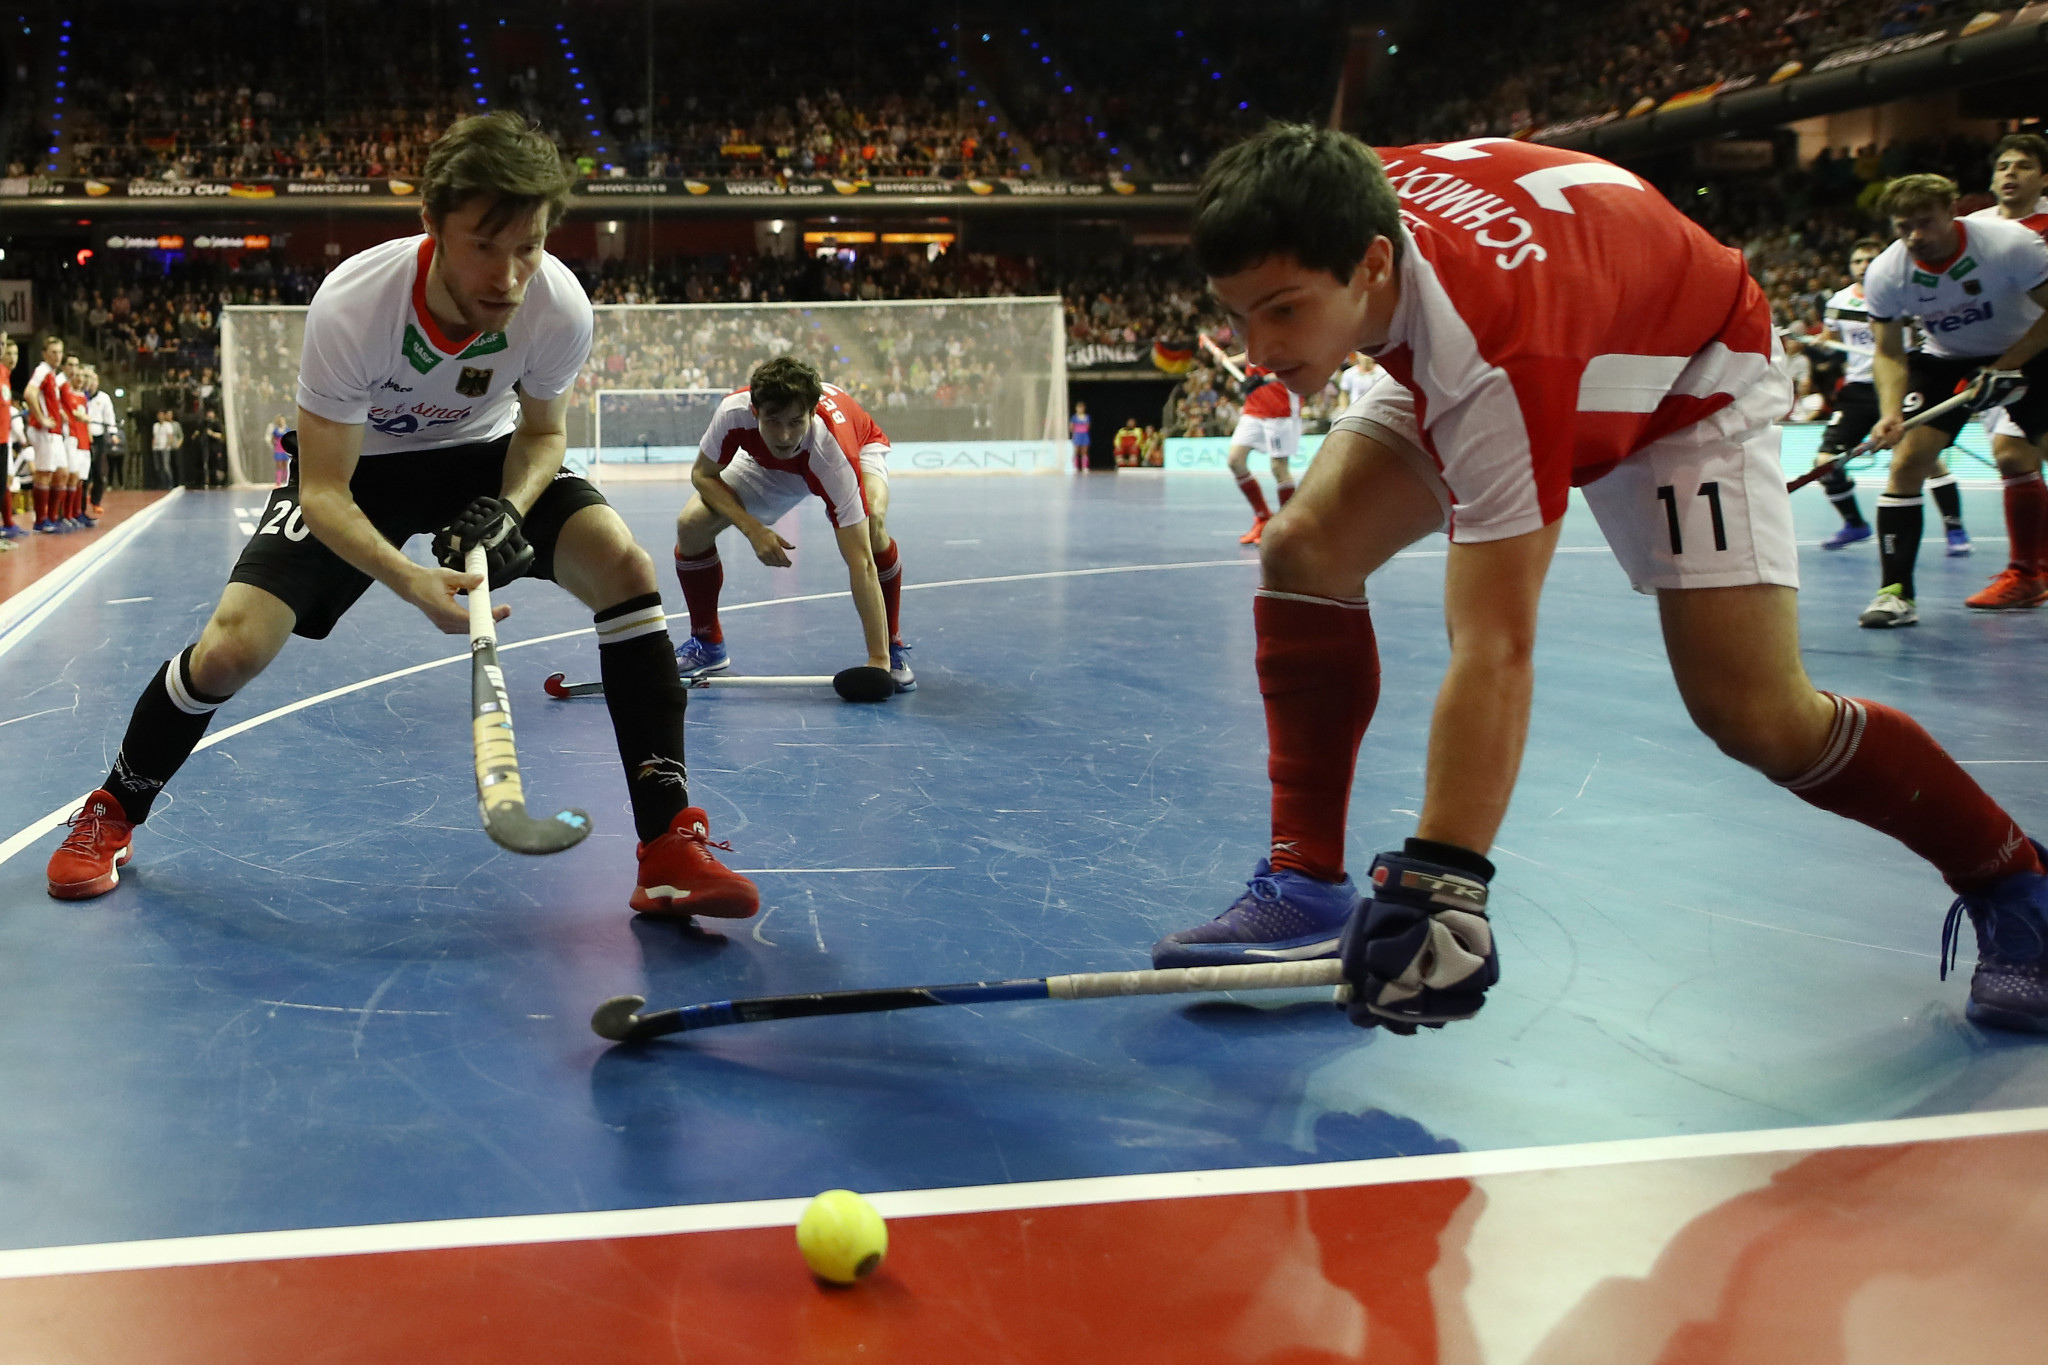 After consecutive tournaments in Germany, Belgium will host the FIH Indoor Hockey World Cup for the first time ©Getty Images 